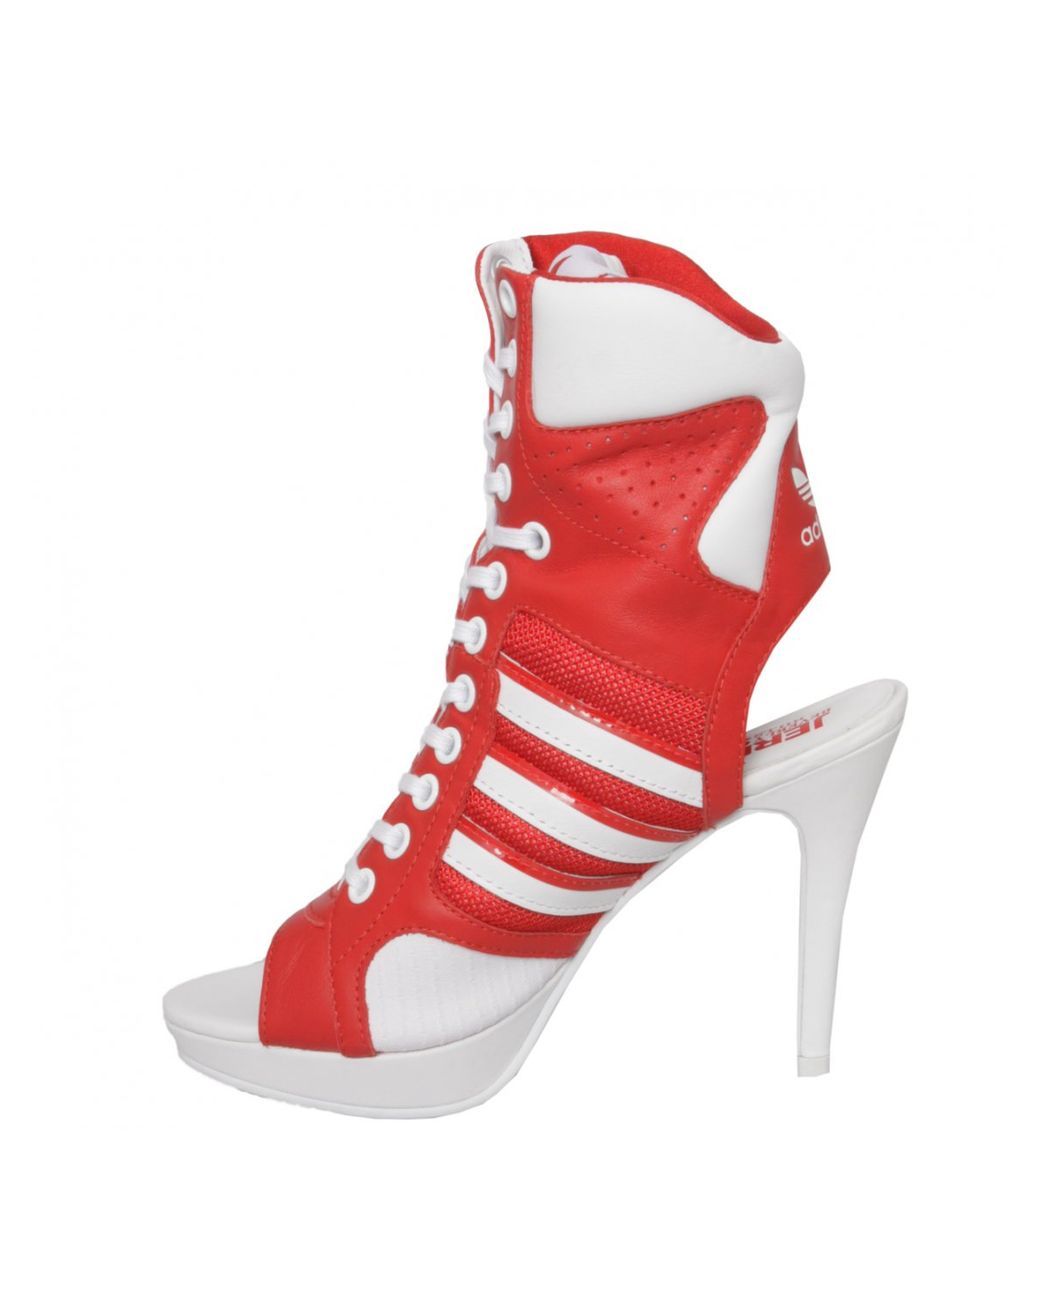 Jeremy Scott for adidas Lace Up High Heels Red | Lyst UK